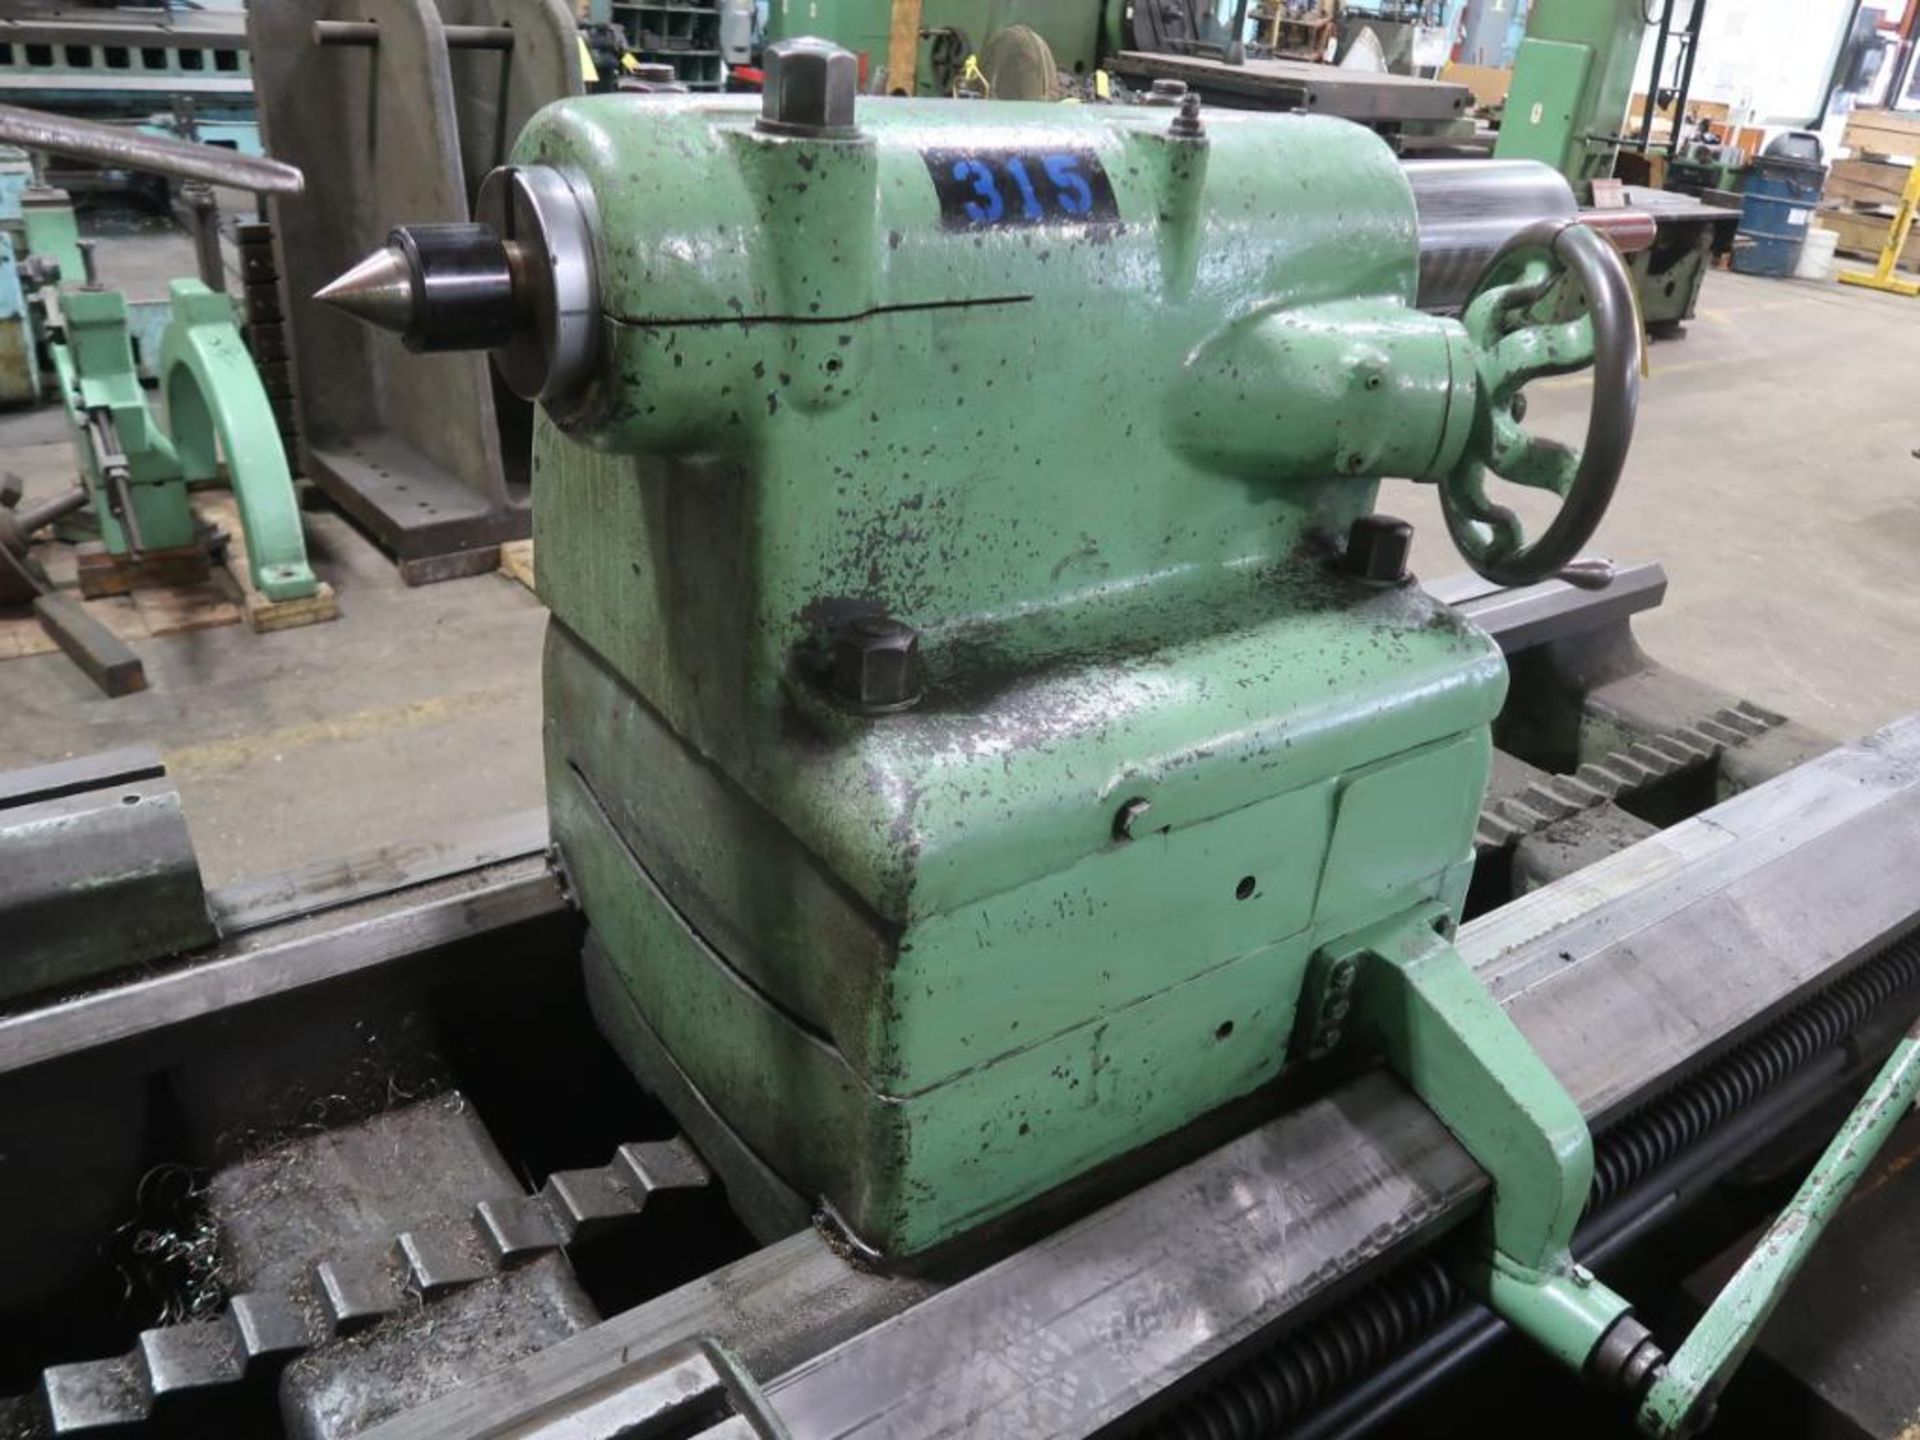 LeBlond 60 in. x 96 in. Geared Head Engine Lathe, S/N N/A, 60 in. 4-Jaw Chuck, Carriage with Cross S - Image 8 of 13